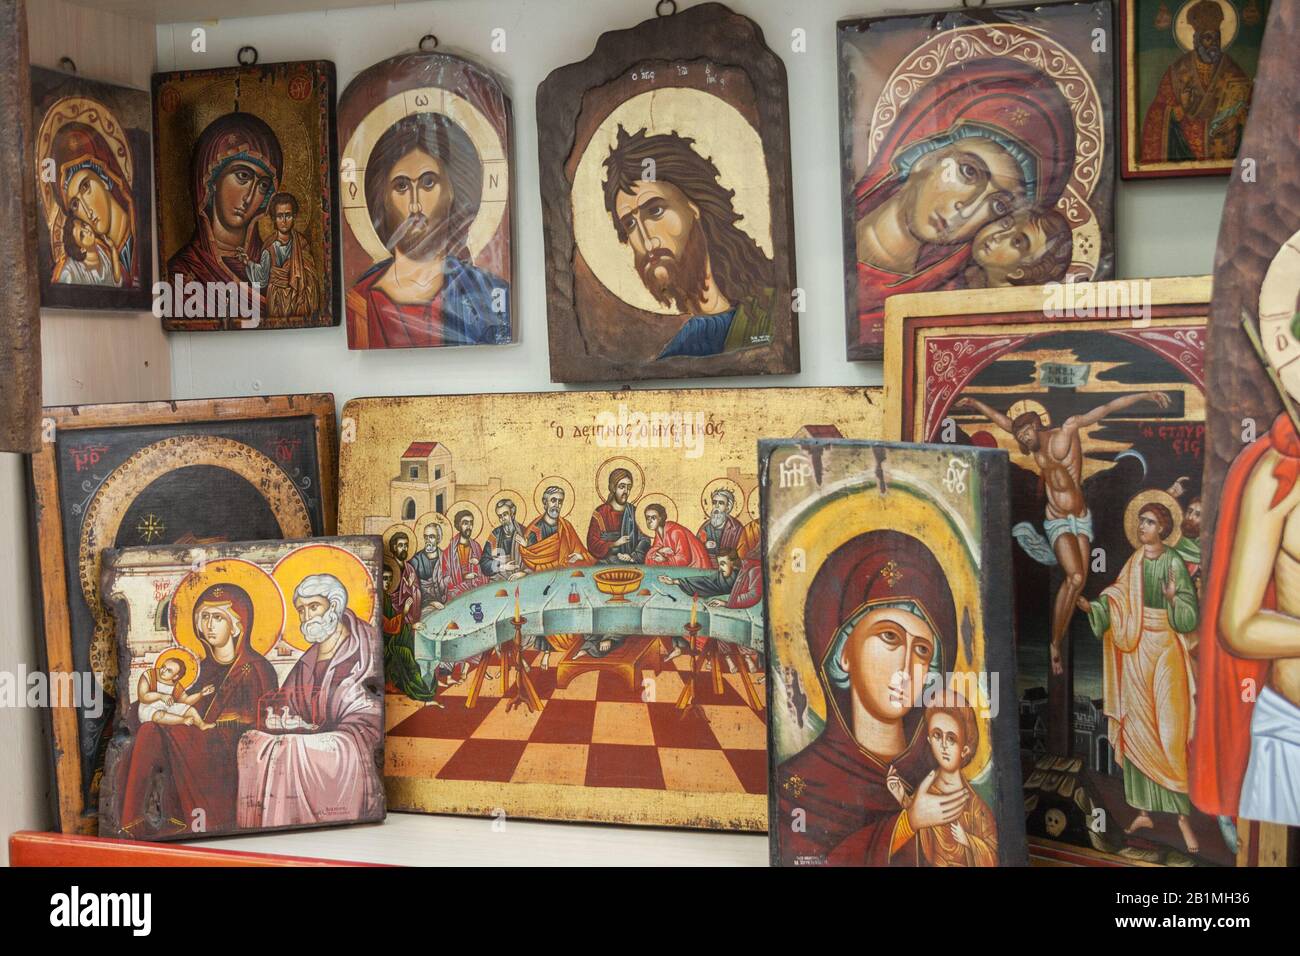 METEORA, GREECE - JUNE 12, 2009: Sale of icons in the icon painting workshop in the monastery shop Stock Photo